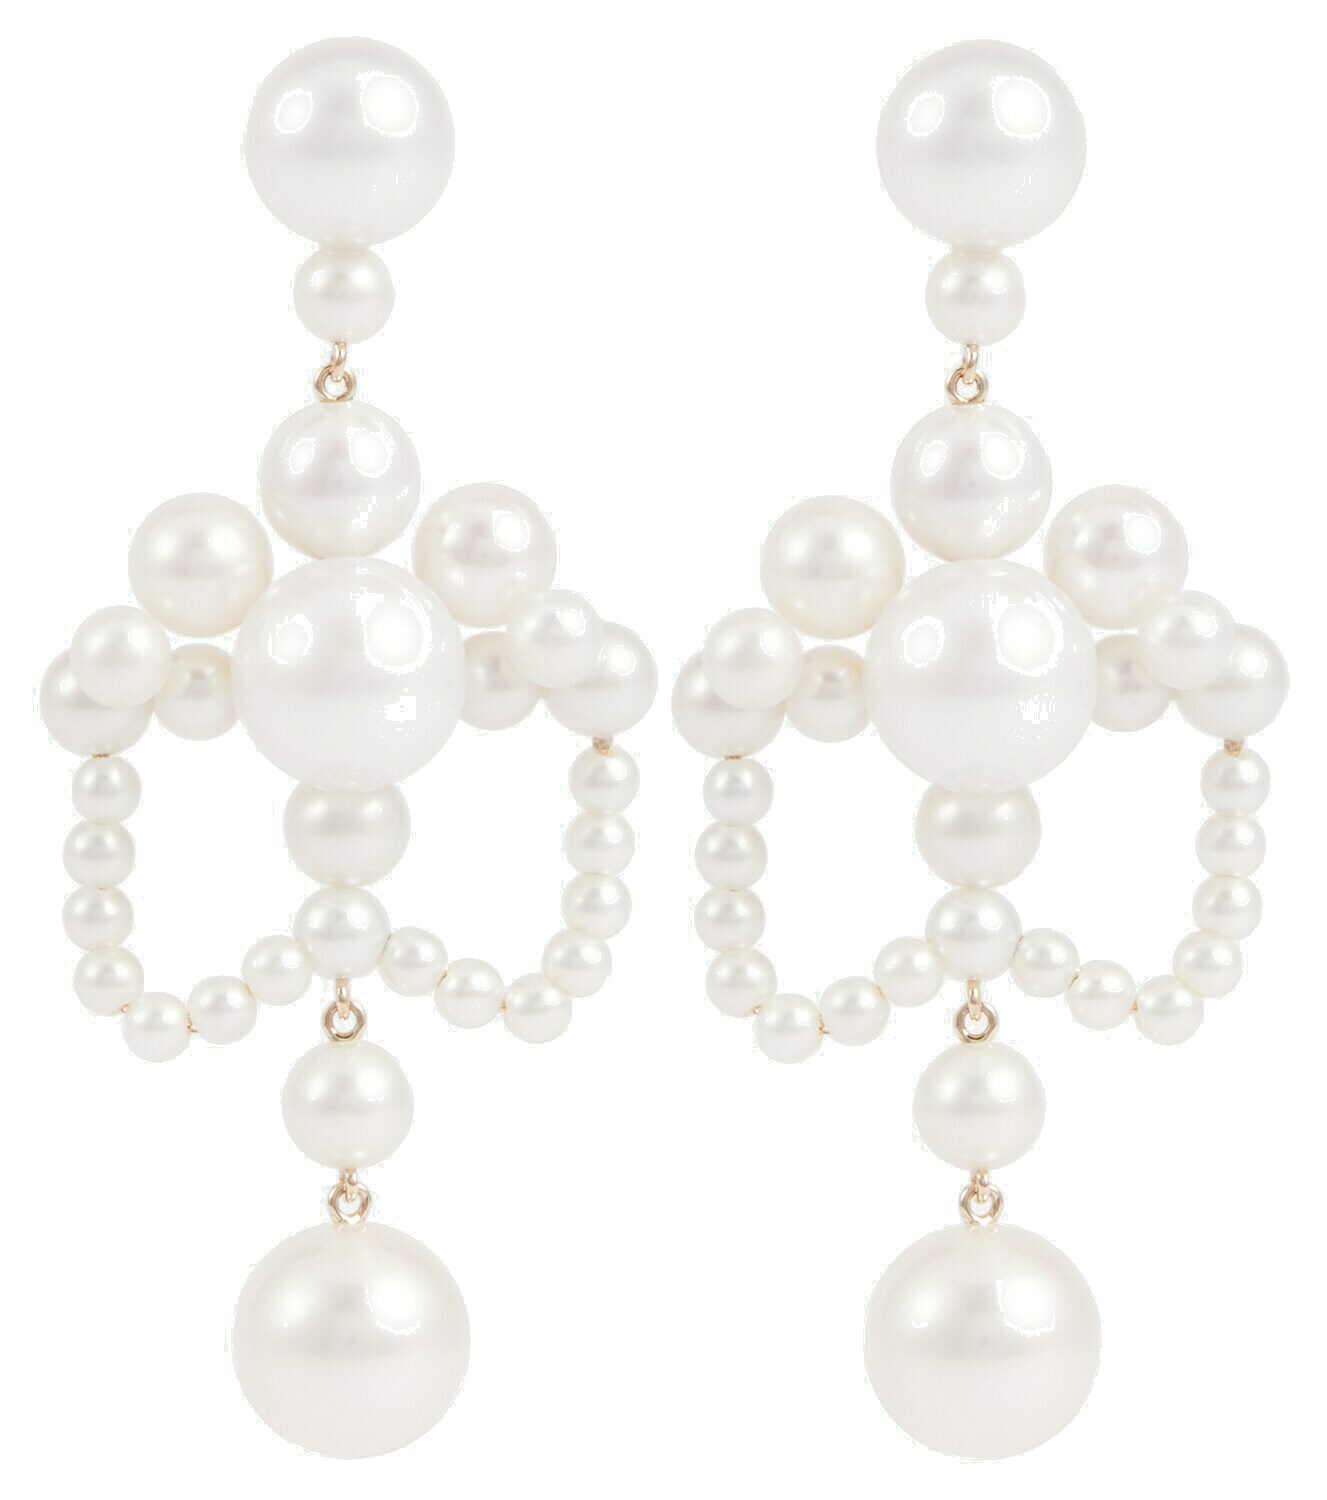 Sophie Bille Brahe - Grand Chateau de Perles 14kt gold earrings with ...